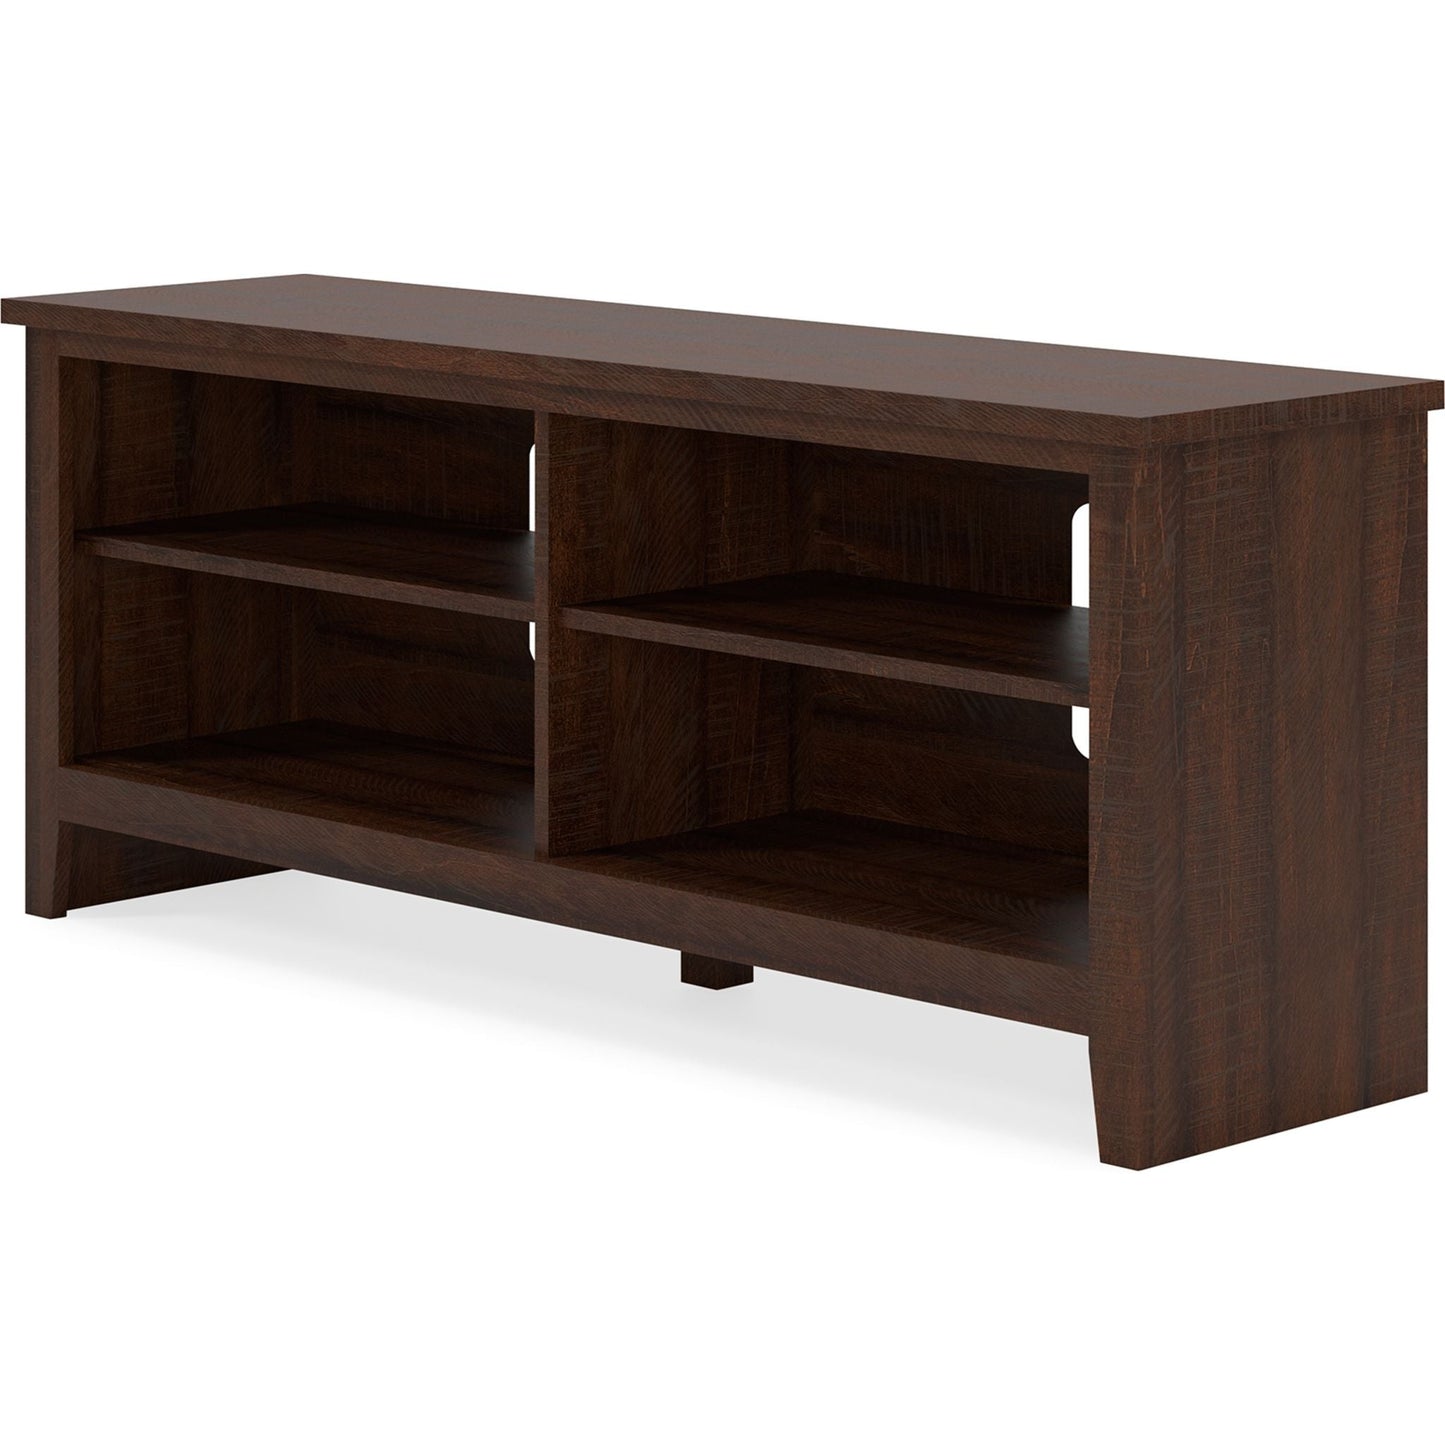 Arlenbry Large TV Stand - Warm Brown